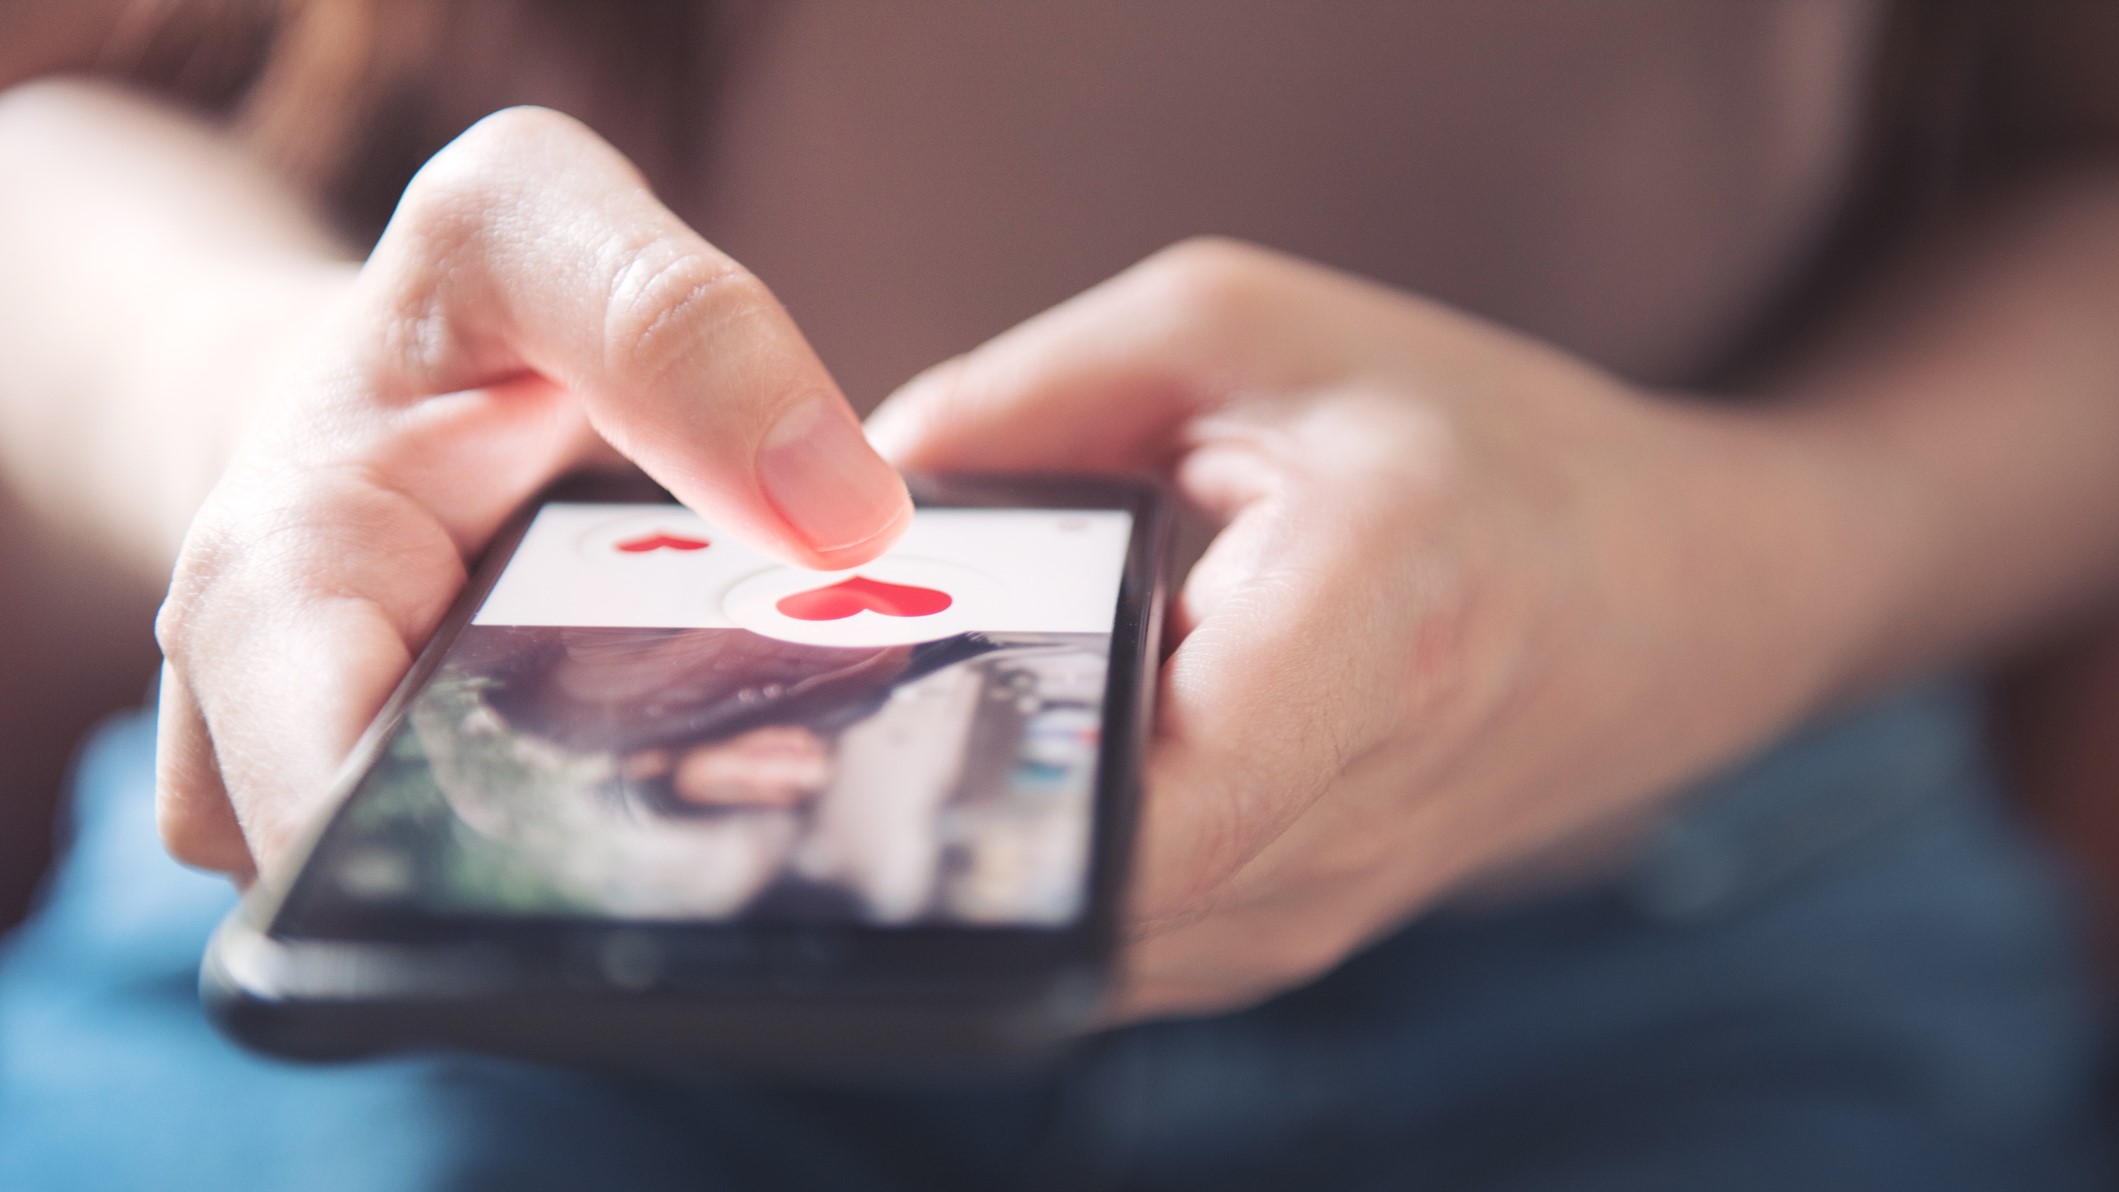 7 Popular Online Dating Sites You Should Check Out